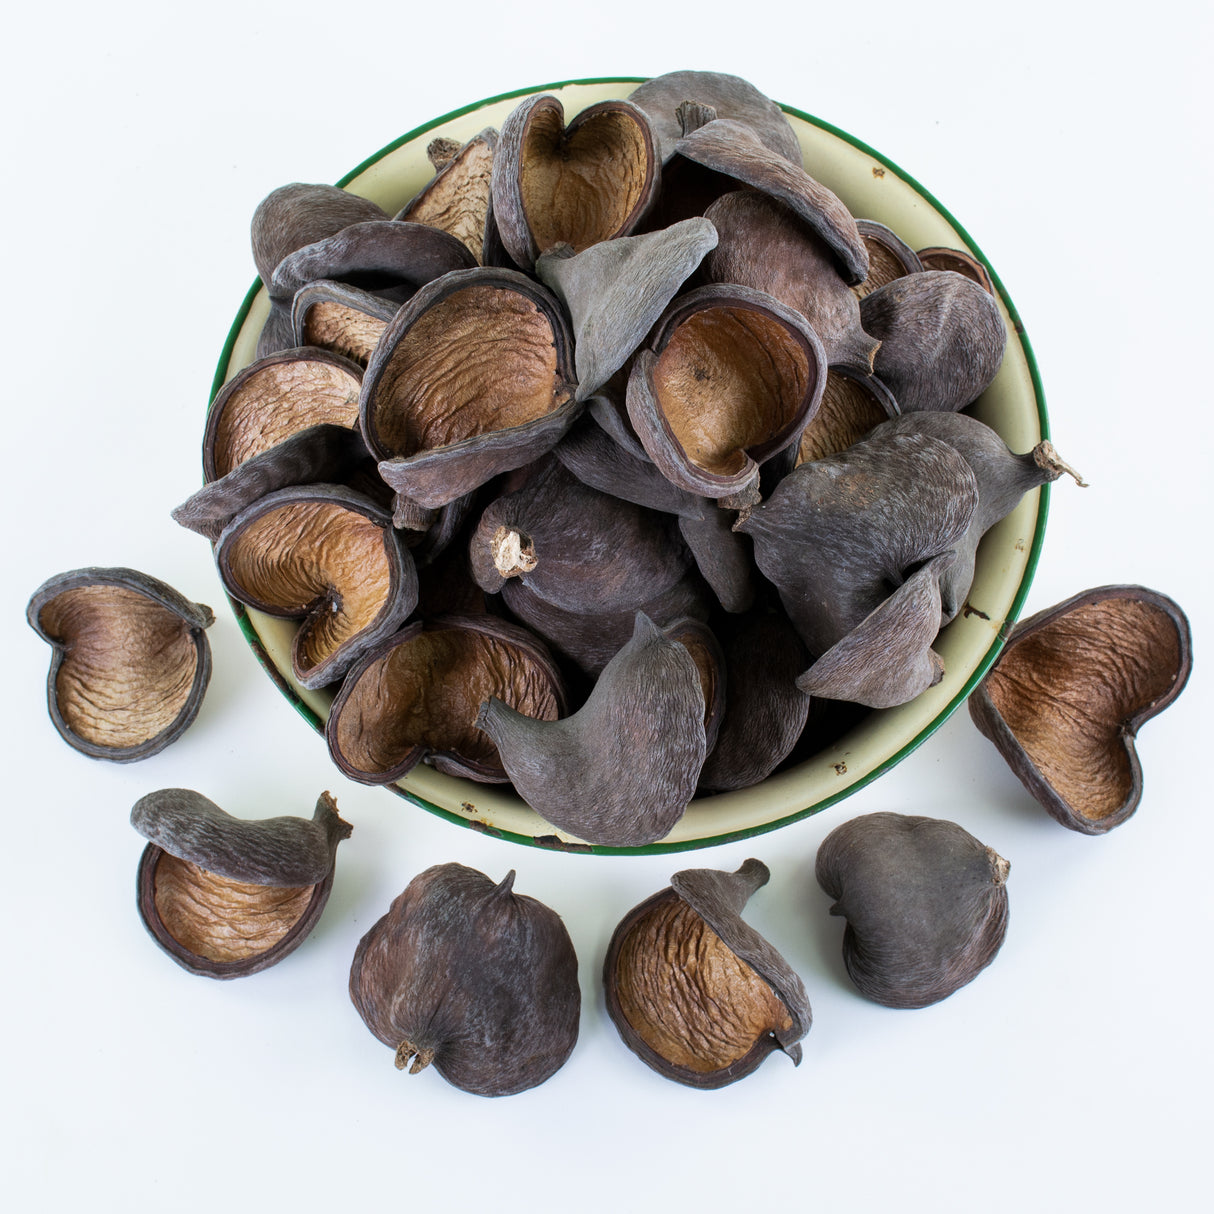 This image shows a group of 50 natural Badam shells against a white background